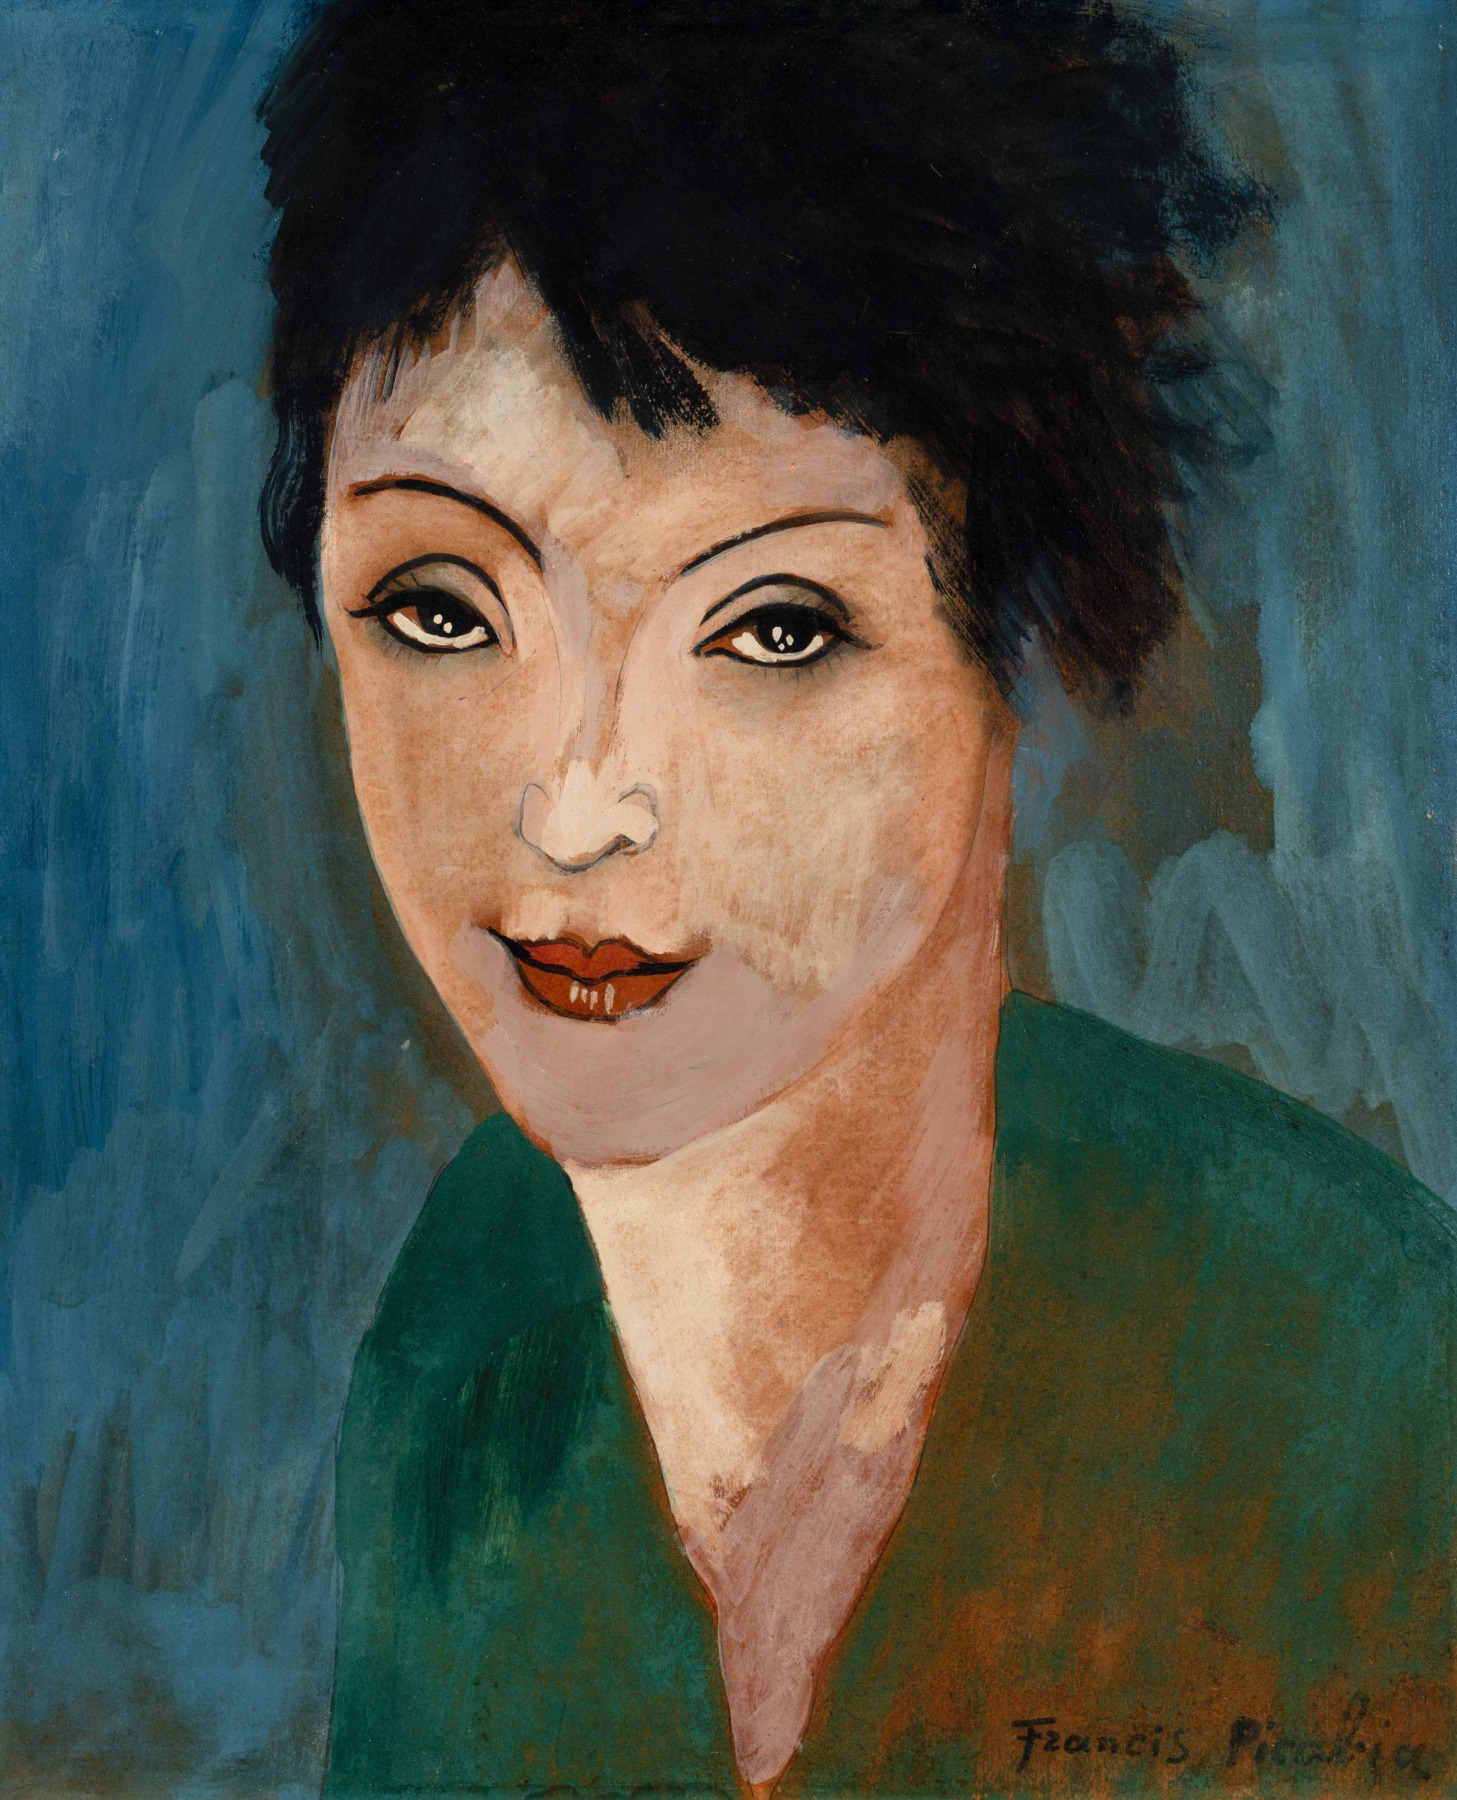 Francis Picabia

&amp;ldquo;T&amp;ecirc;te de femme&amp;rdquo;, ca. 1936-1937

Oil and pencil on board

18 x 15 inches

46 x 38 cm

PIC 158